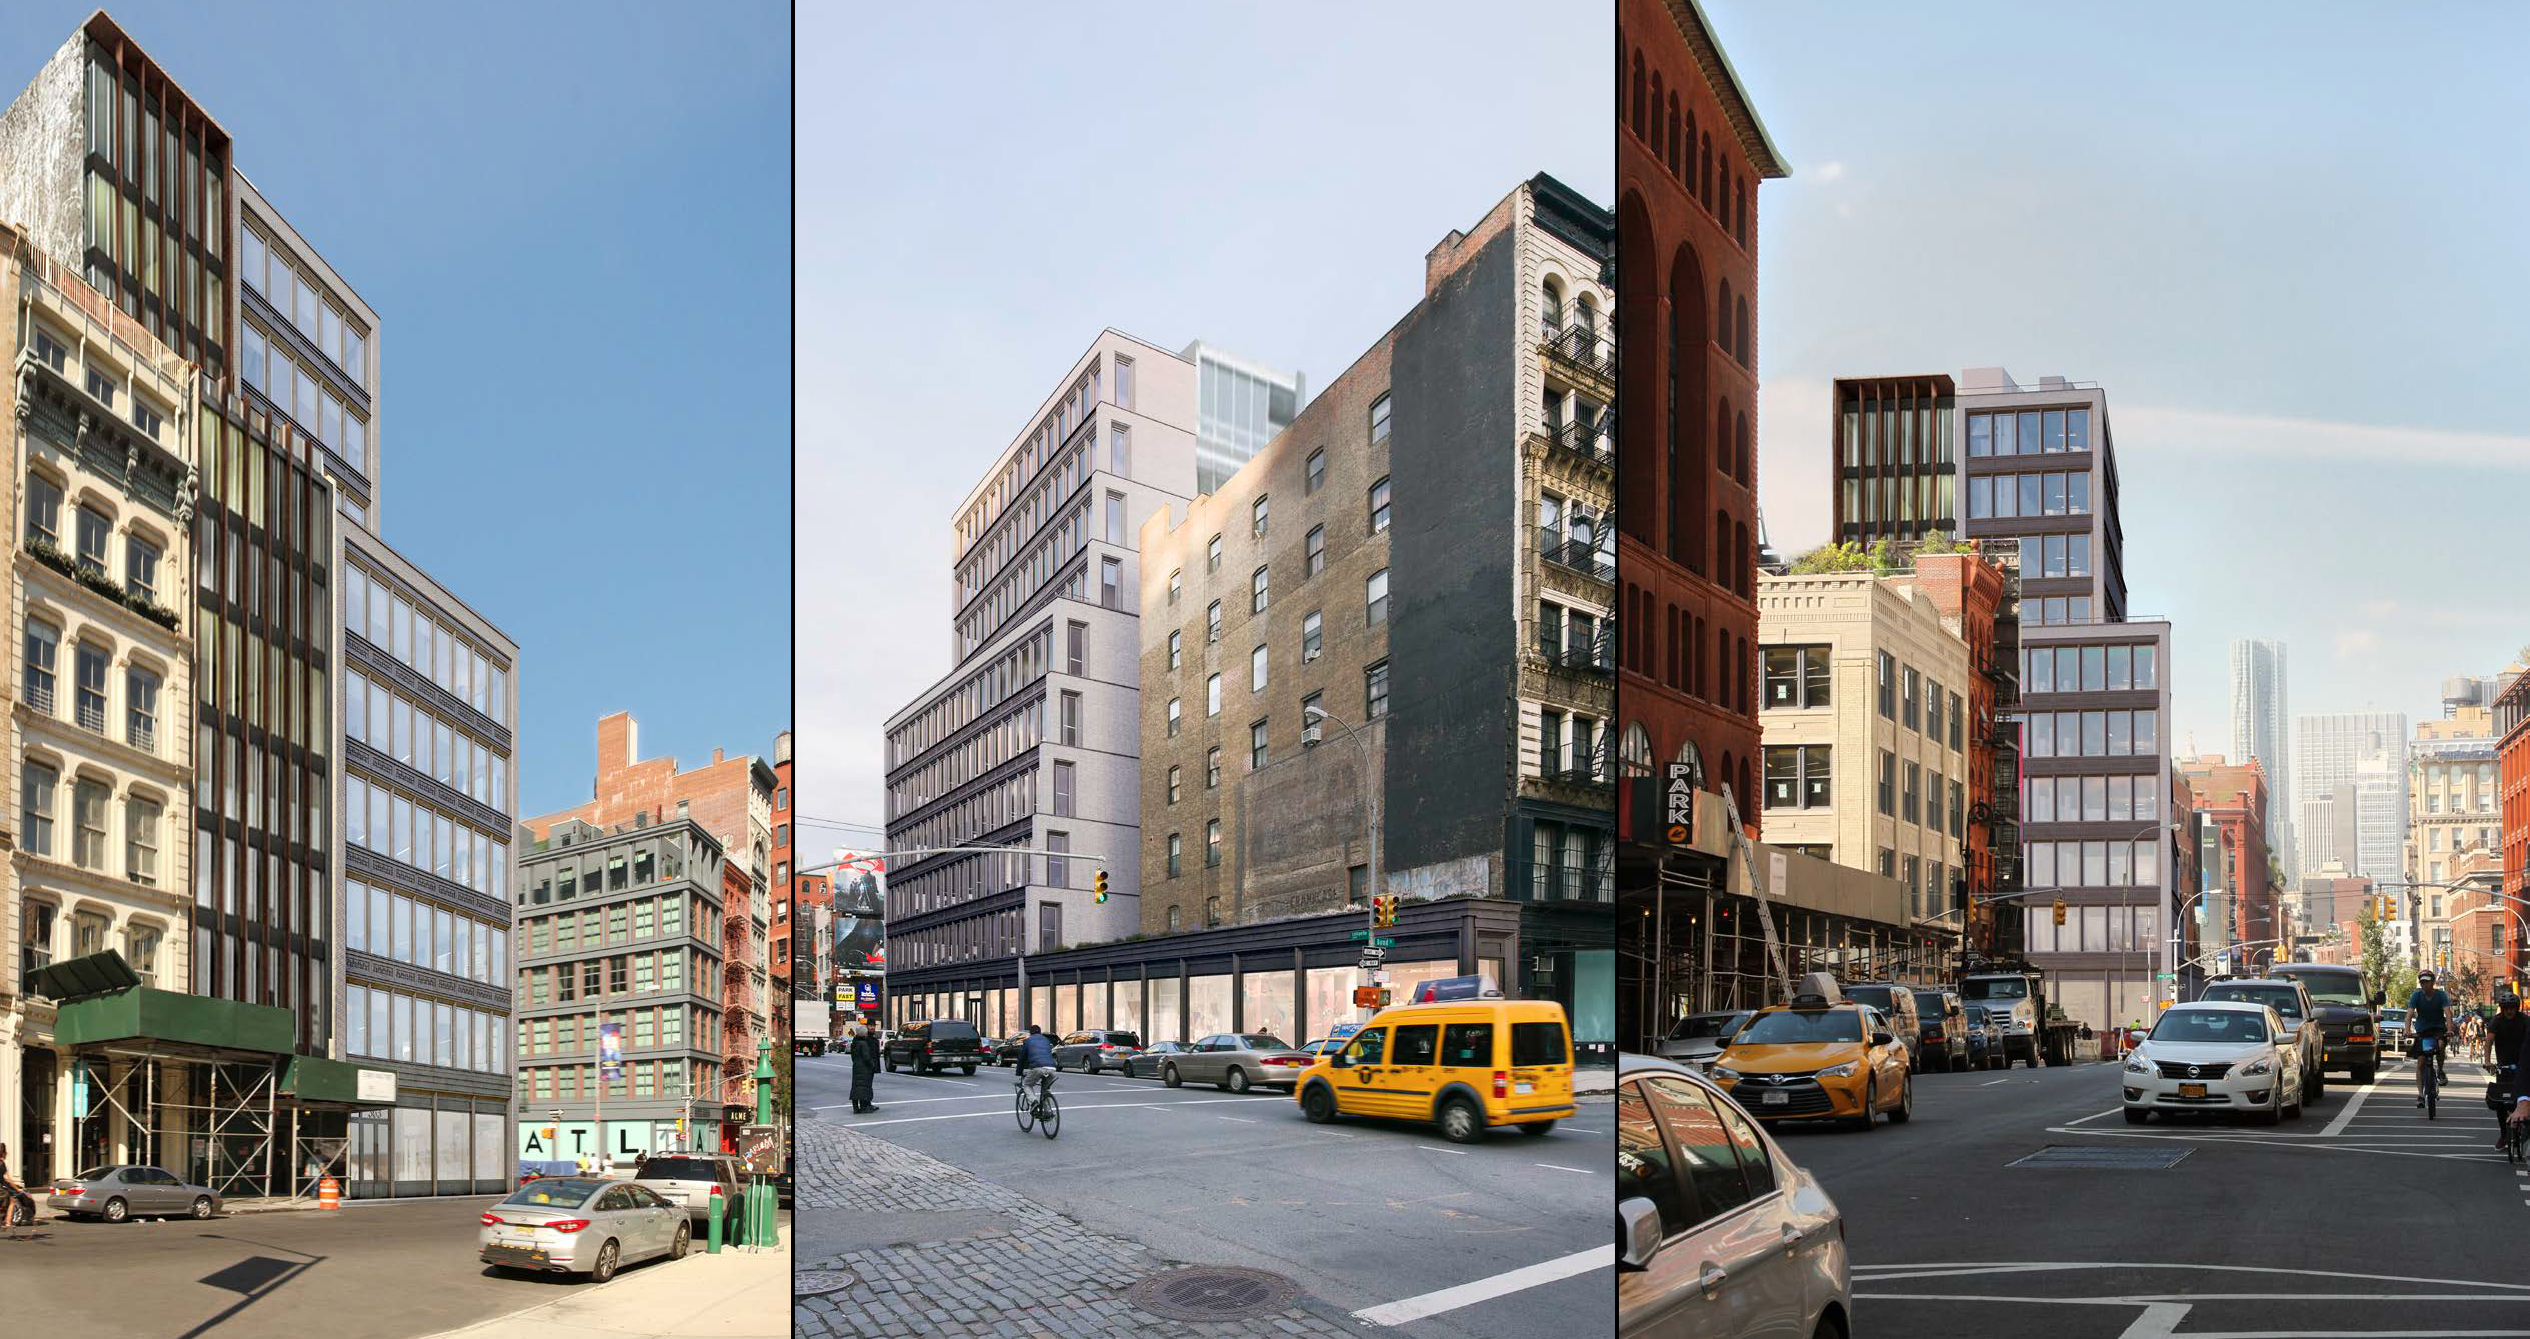 More renderings of the revised proposal for 363 Lafayette Street